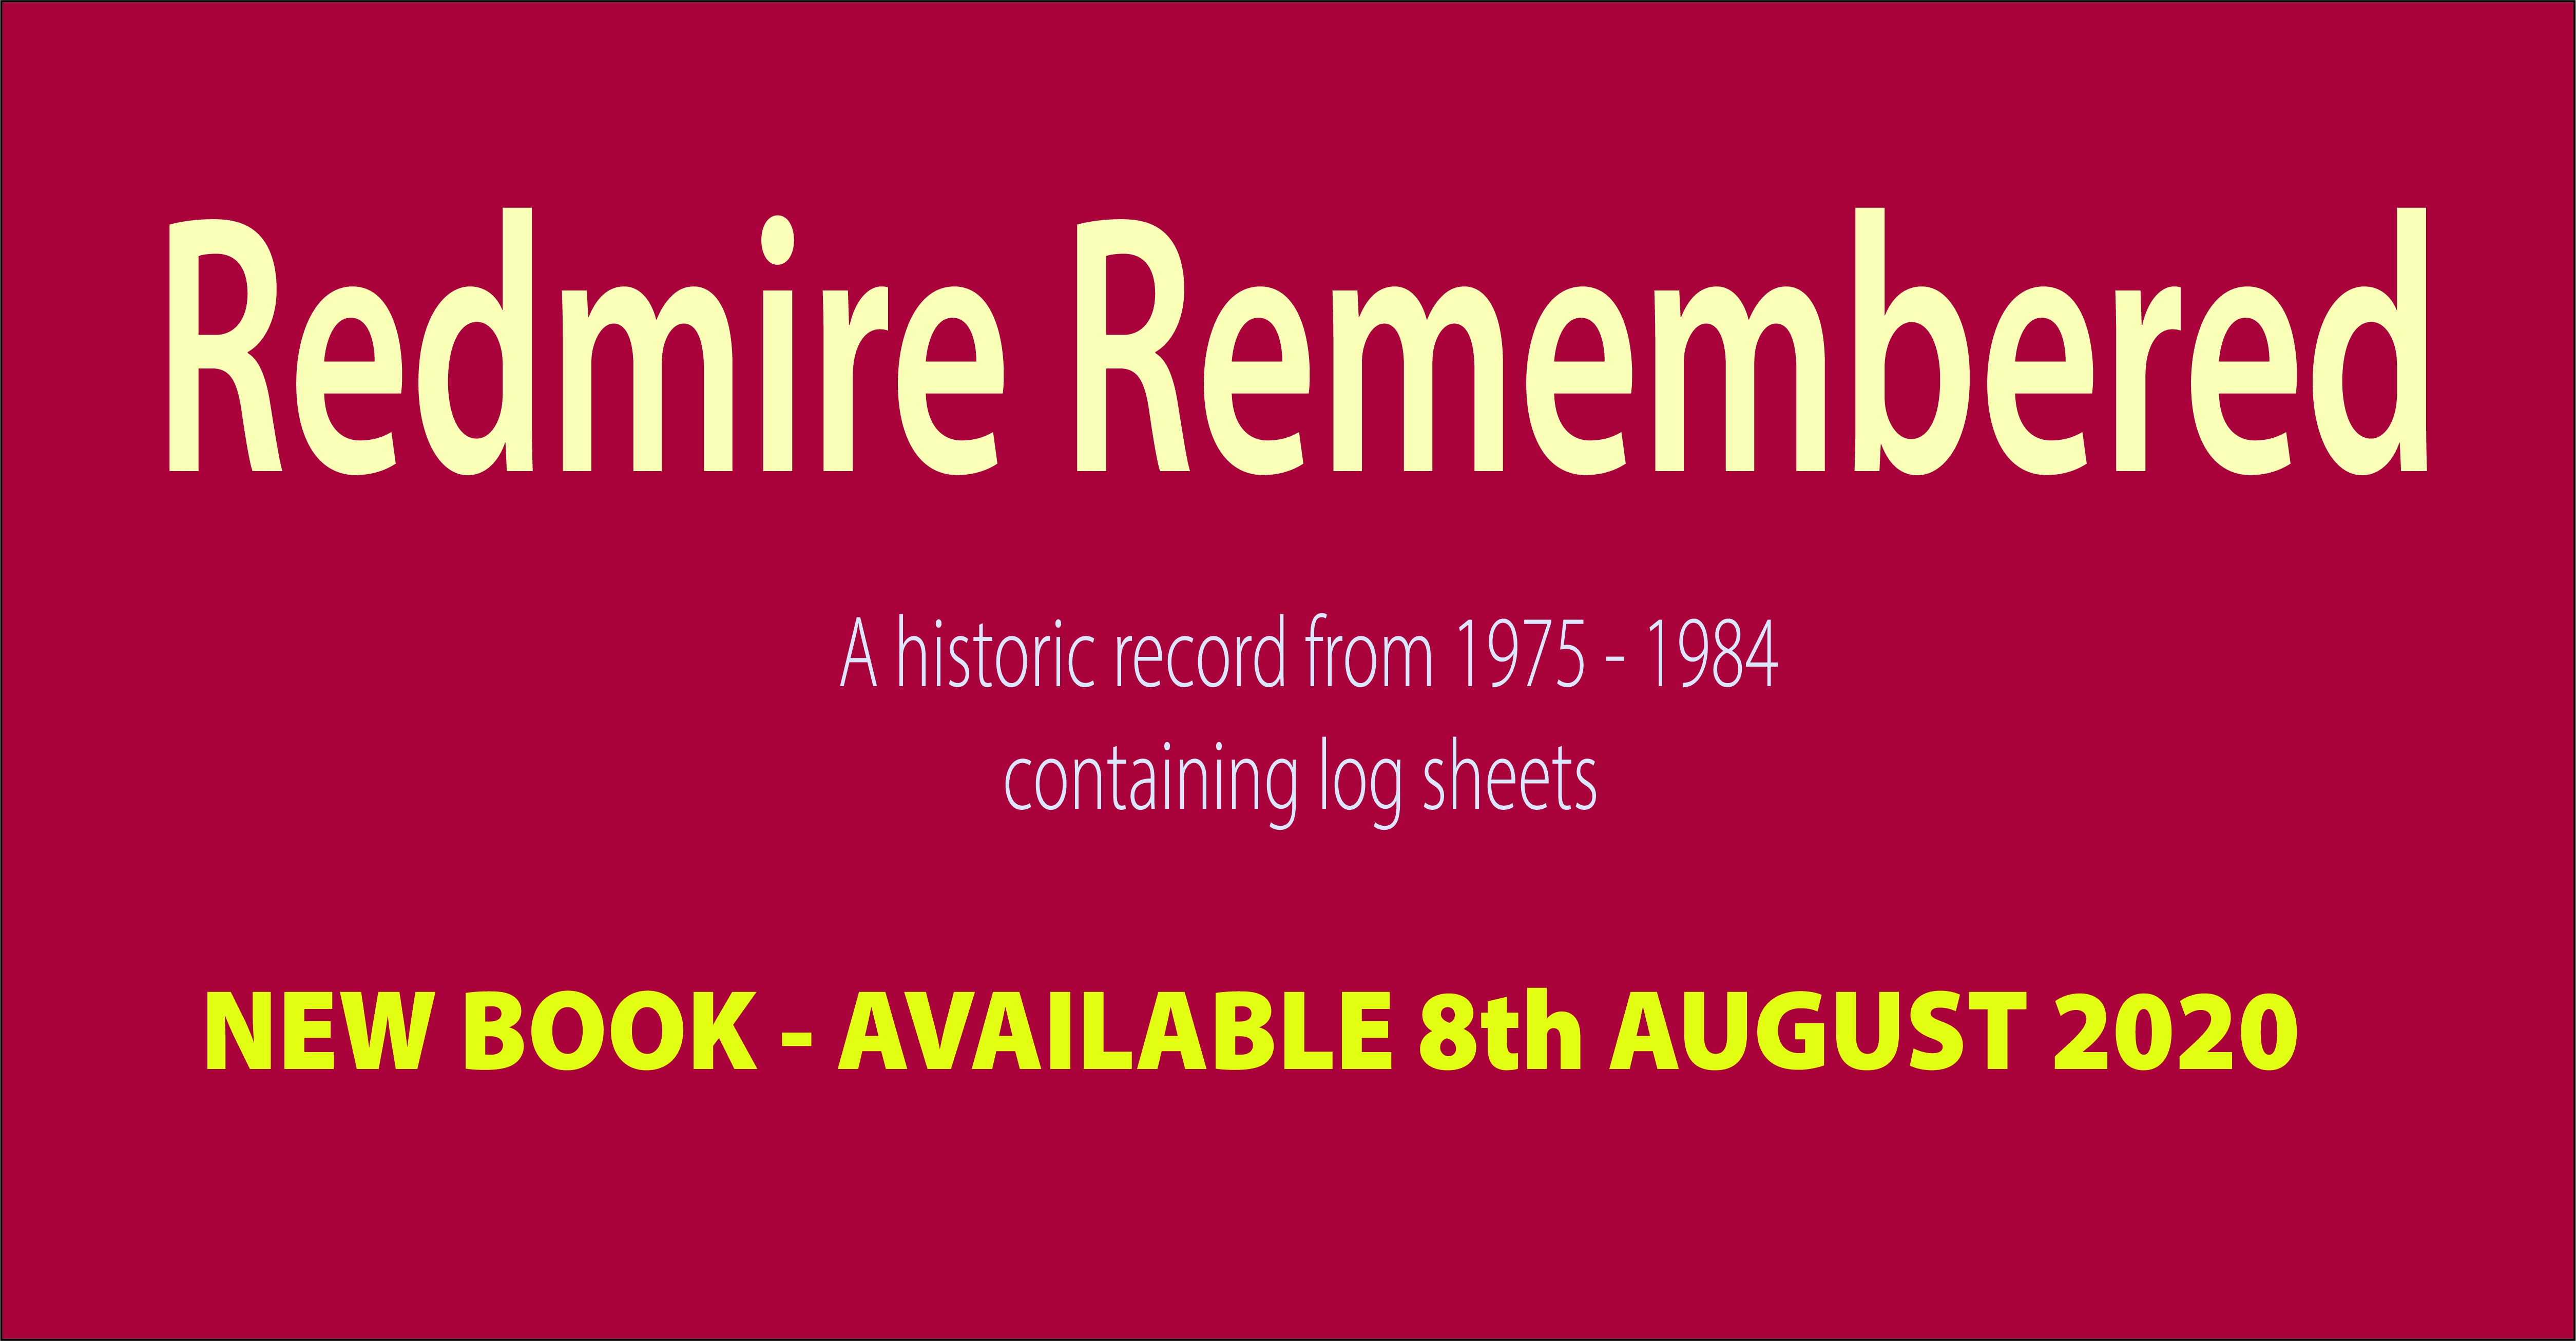 Redmire Remembered - New book 